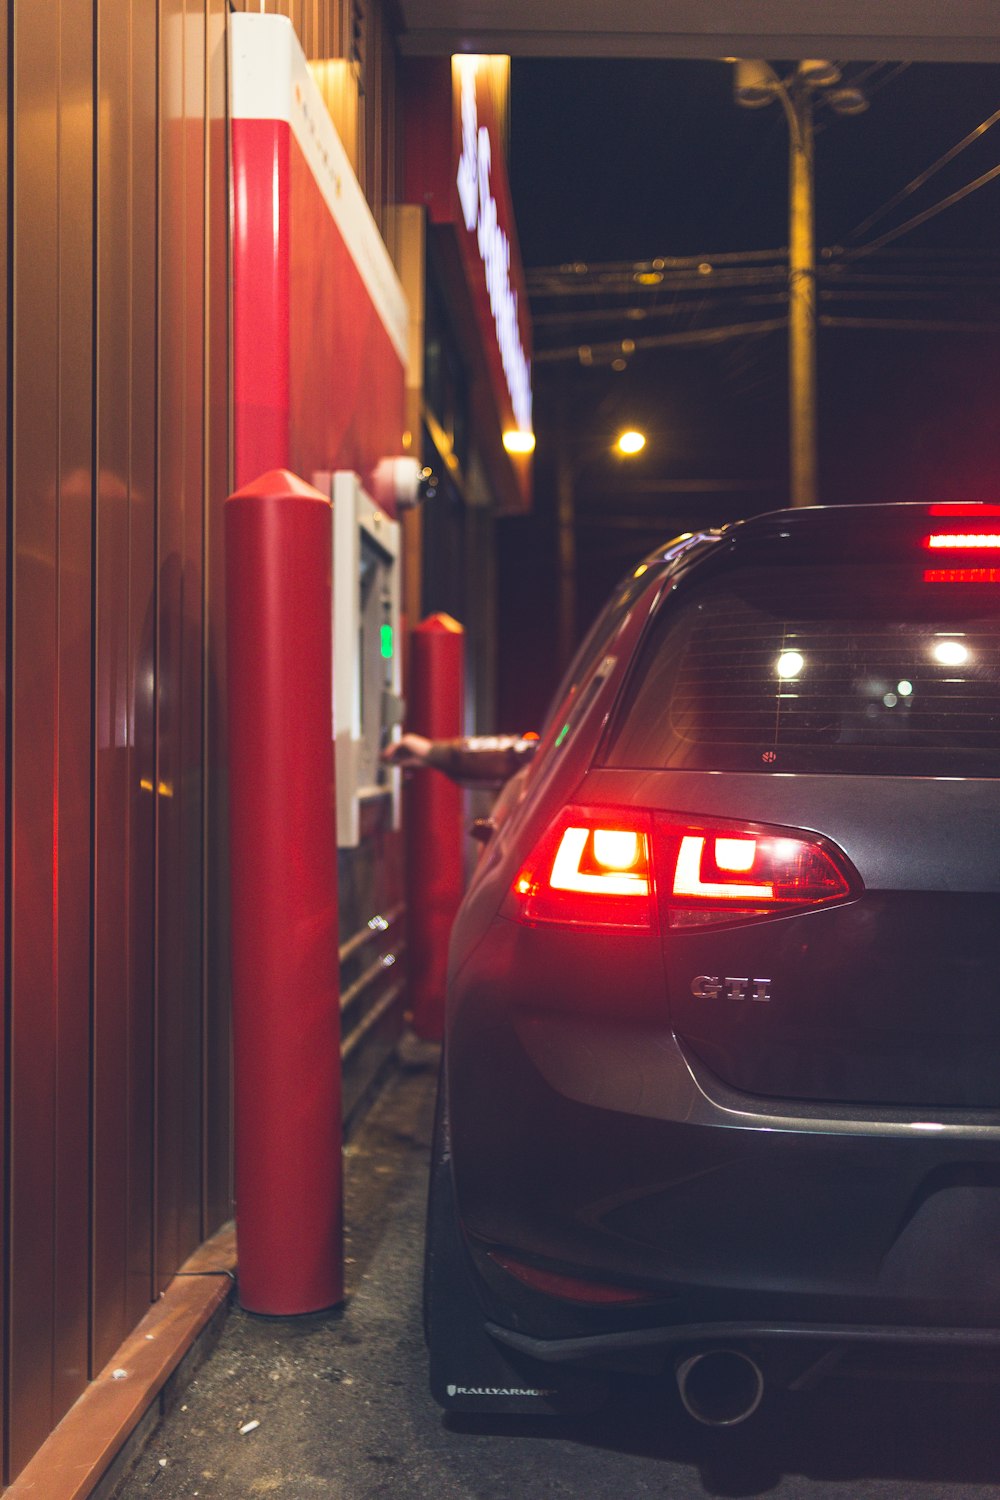 Black car in front of red lighted building photo – Free Automobile Image on  Unsplash